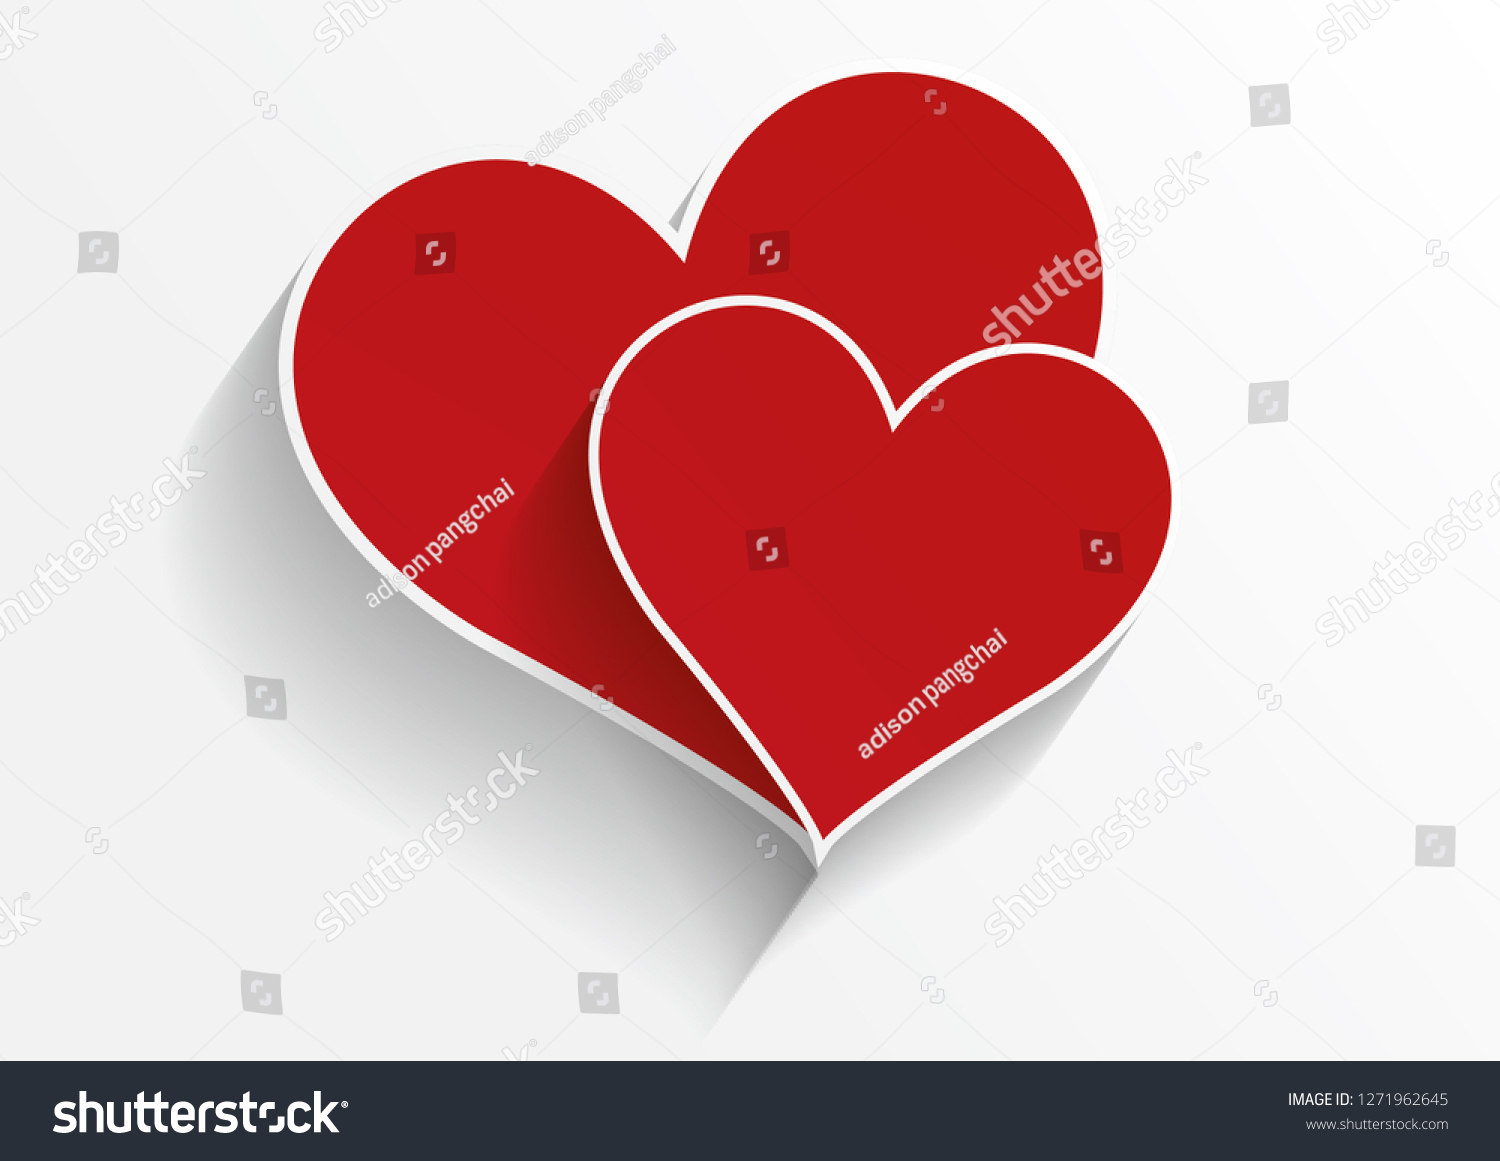 SVG of Stylish Hearts Composition.two hearts.Love Hearts.Valentine's background with two red hearts. Vector illustration - Vector svg